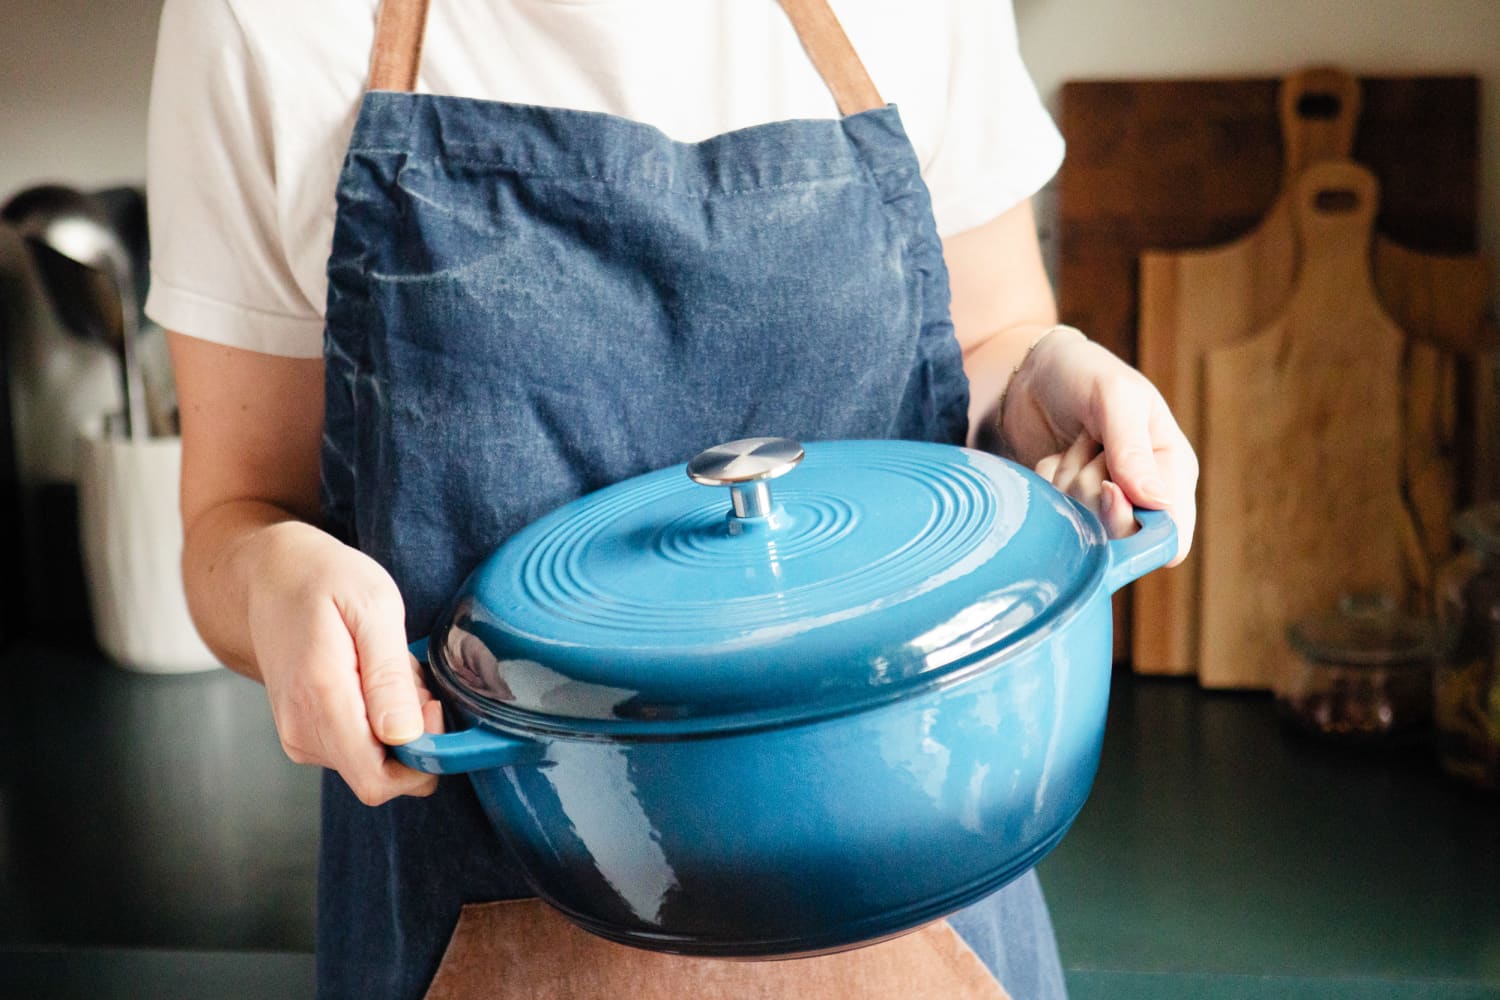 The Lodge enamel Dutch oven everyone wants is on sale for 50% off